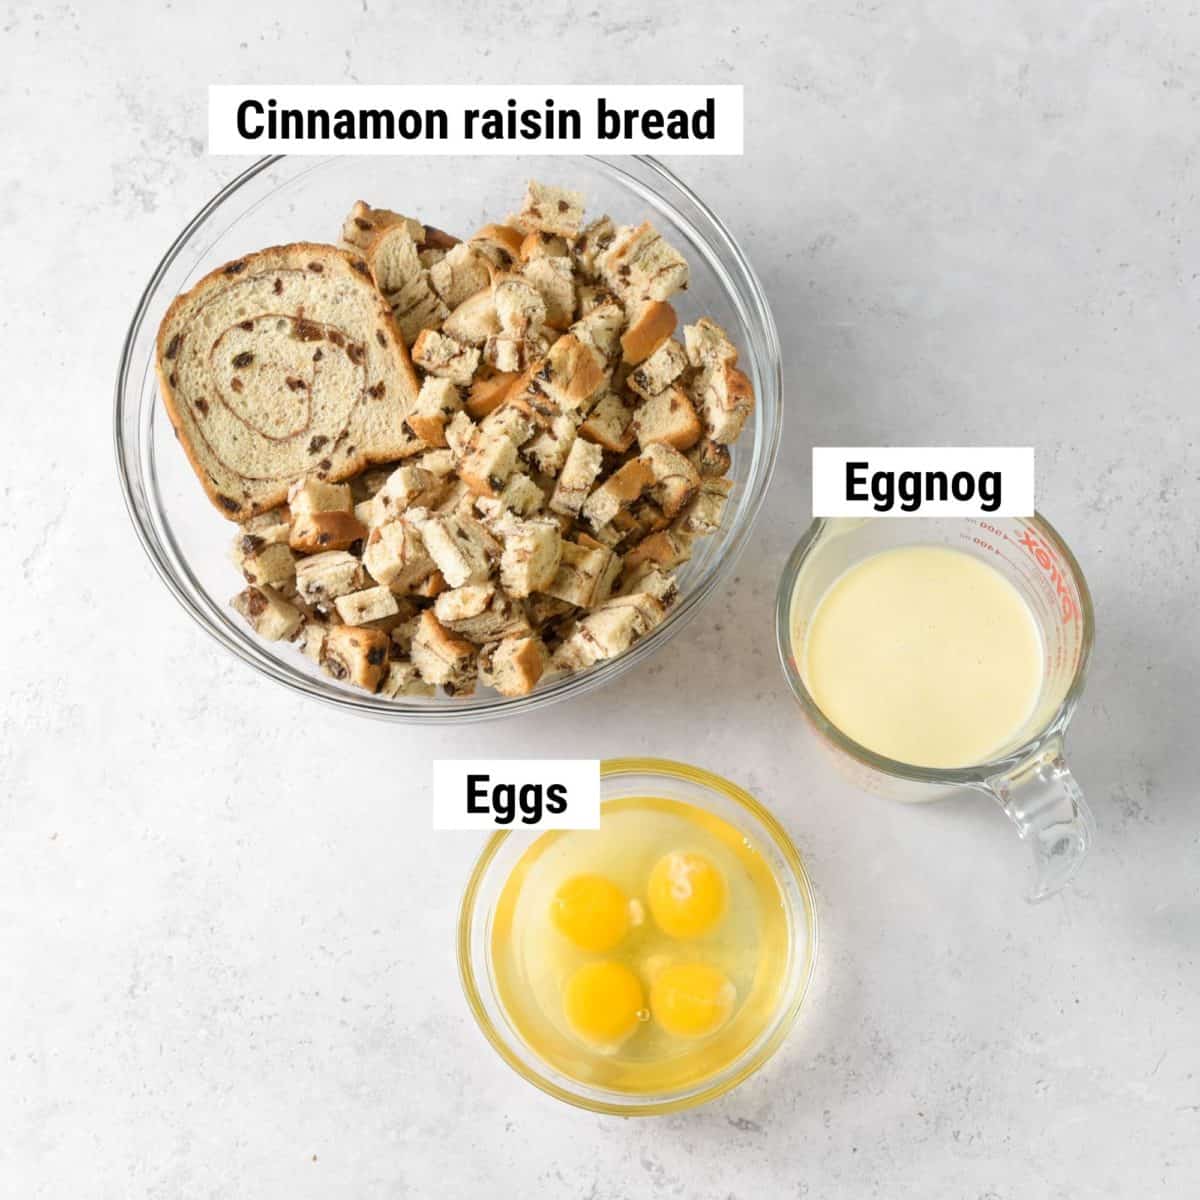 The ingredients used to make eggnog bread pudding spread out on a table.